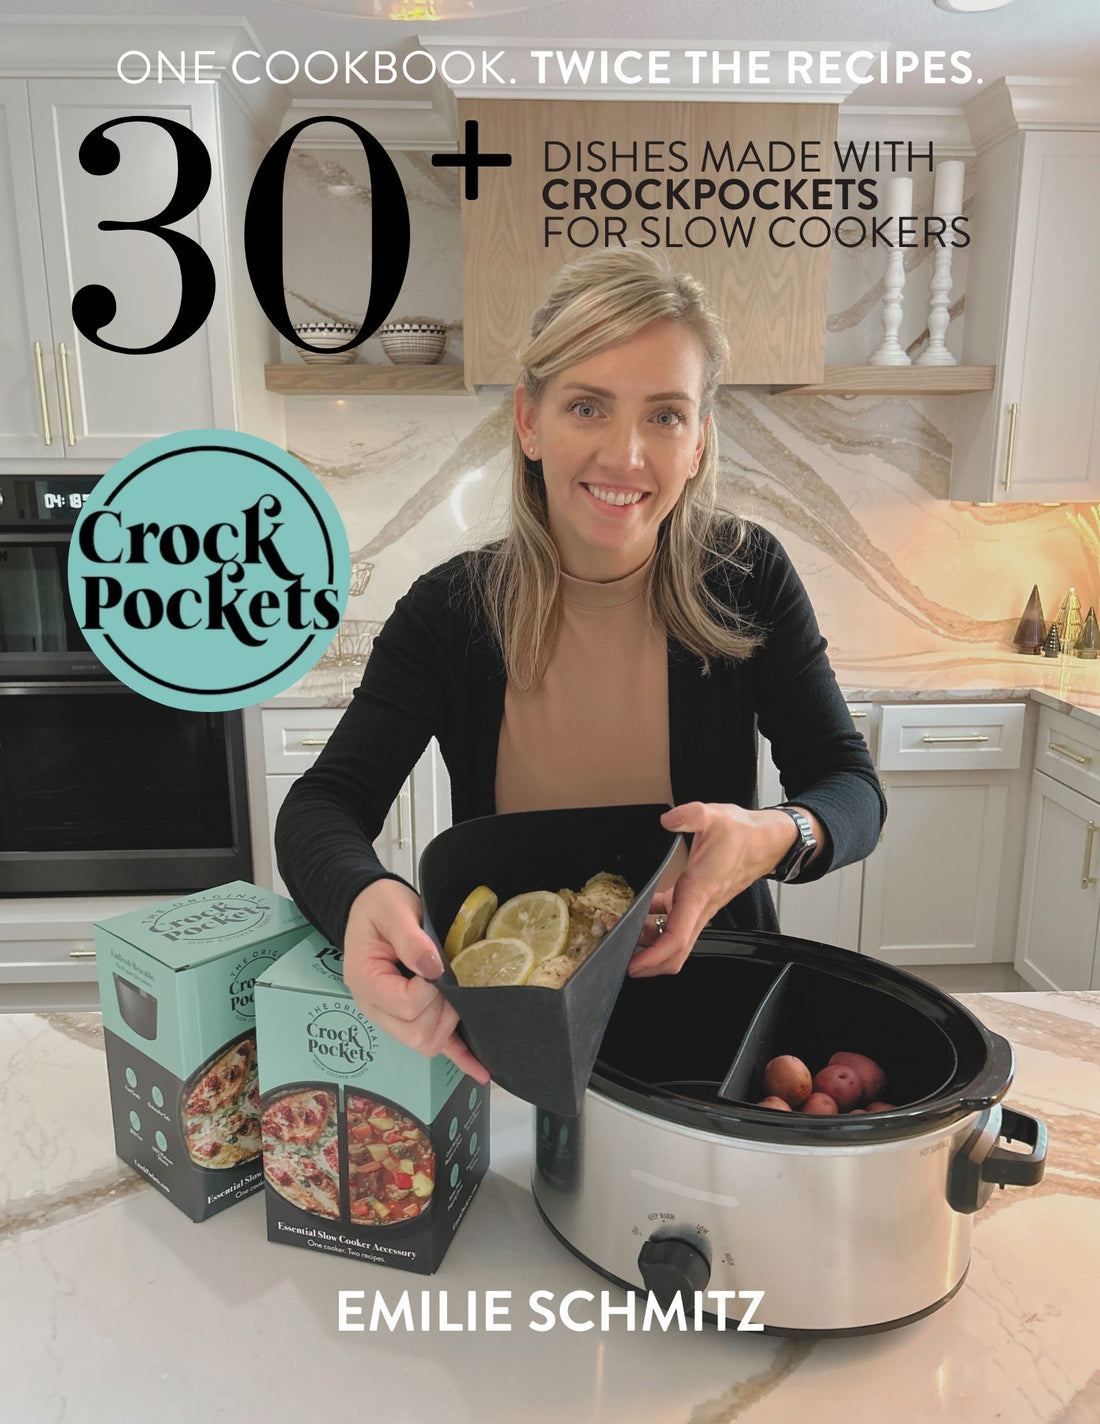 The CrockPockets Recipe Book is Here!